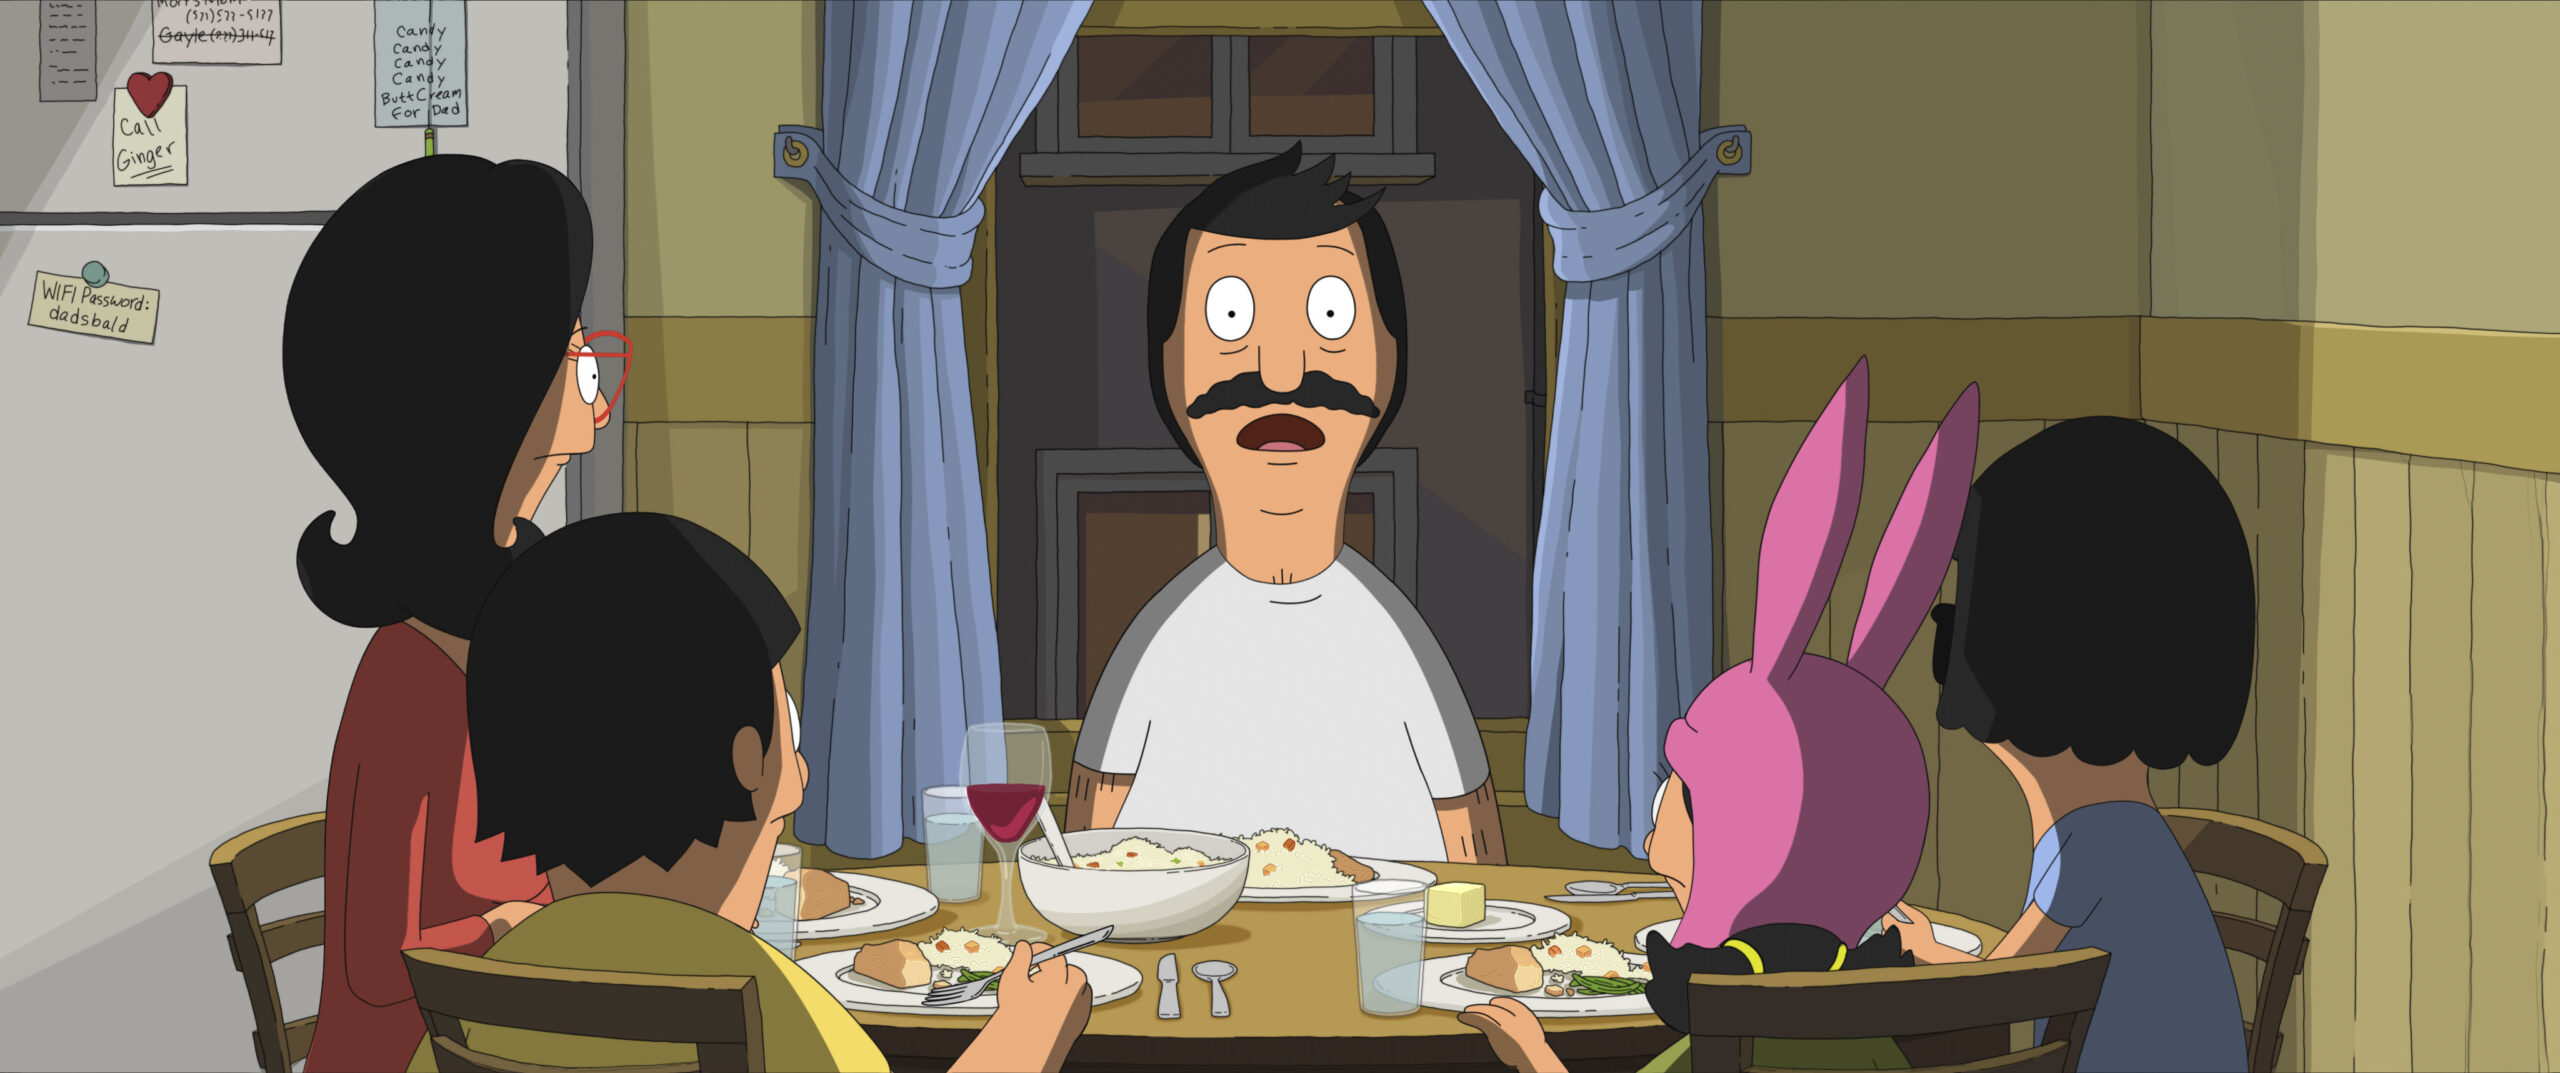 [Article] THE BOB’S BURGERS MOVIE: From TV to the Silver Screen